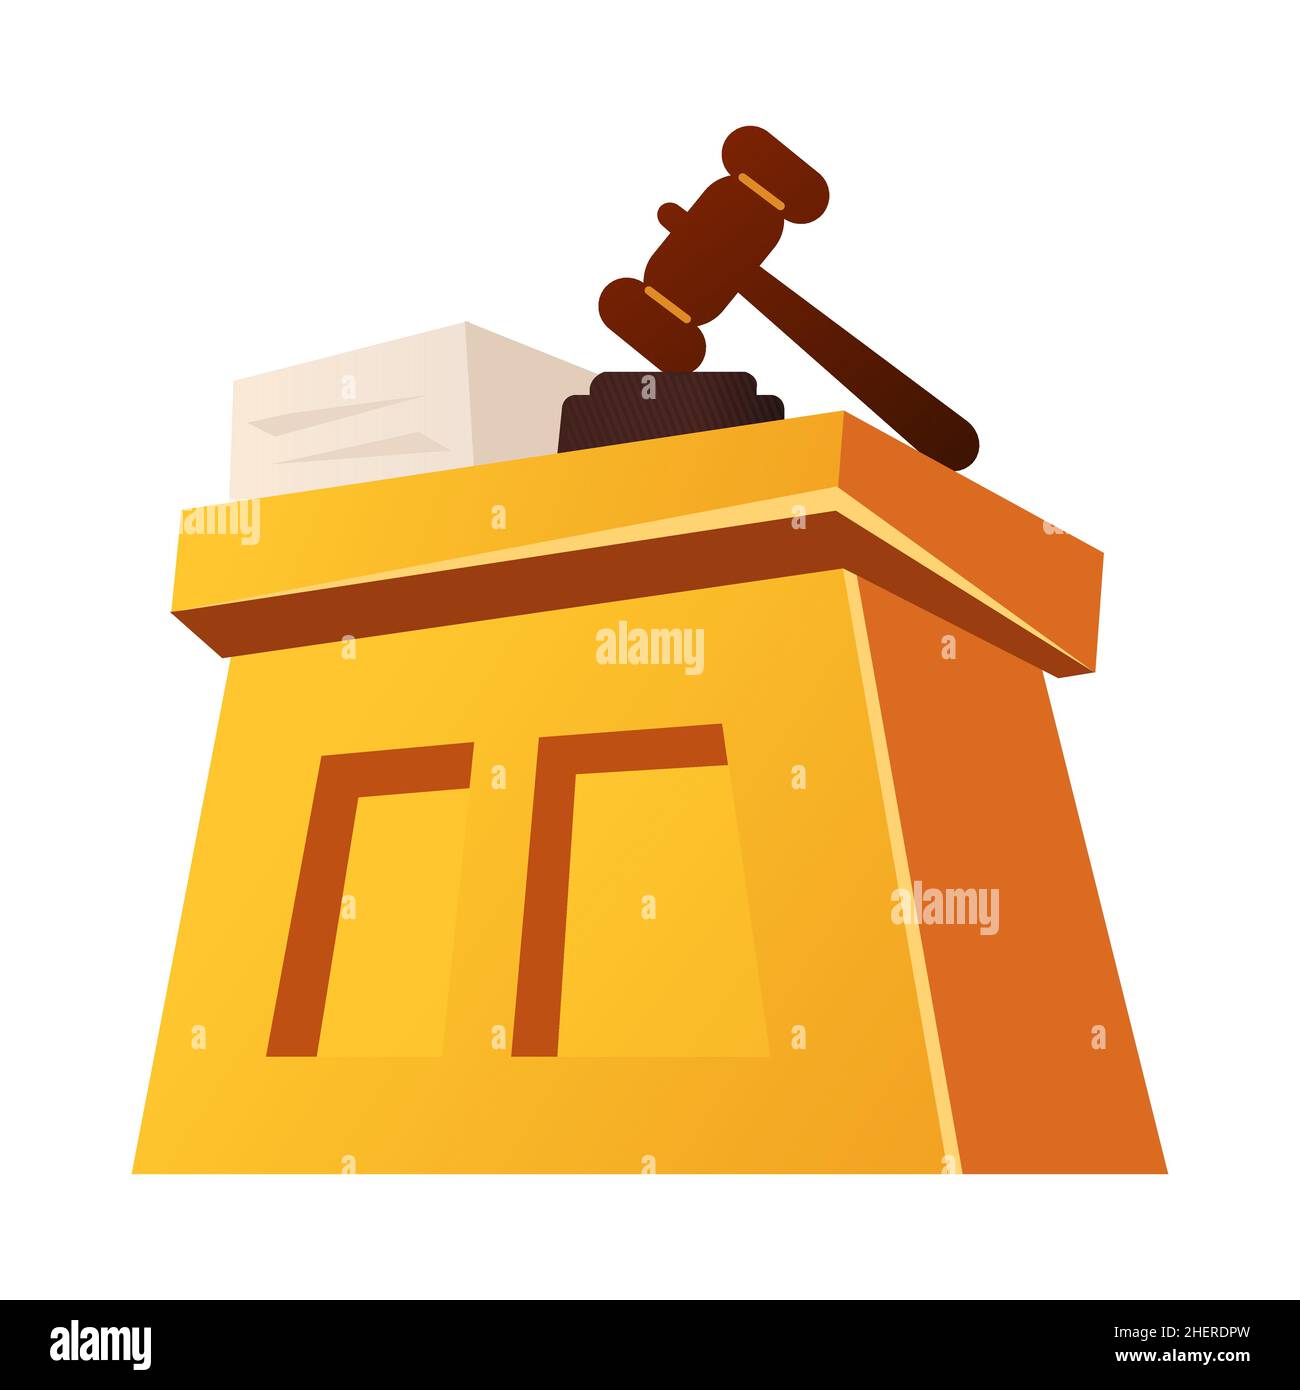 Trial tribune - modern flat design single isolated object. Neat detailed image of yellow wooden rostrum, judgment hammer and stack of papers with the Stock Vector